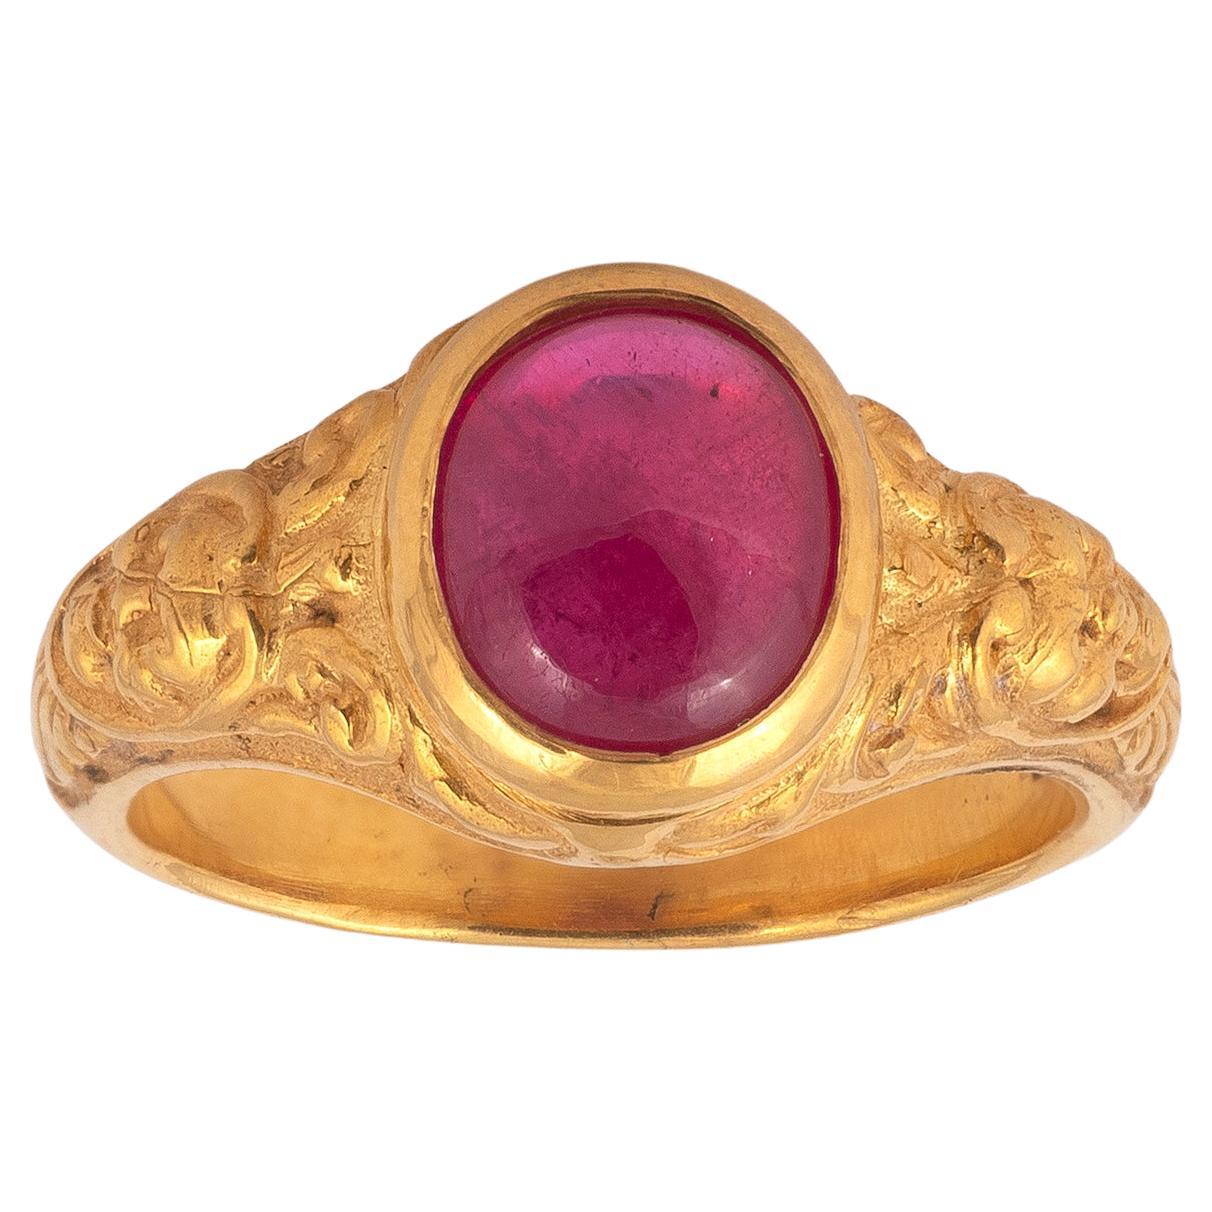 Renaissance Revival Gold and Ruby Masks Ring For Sale